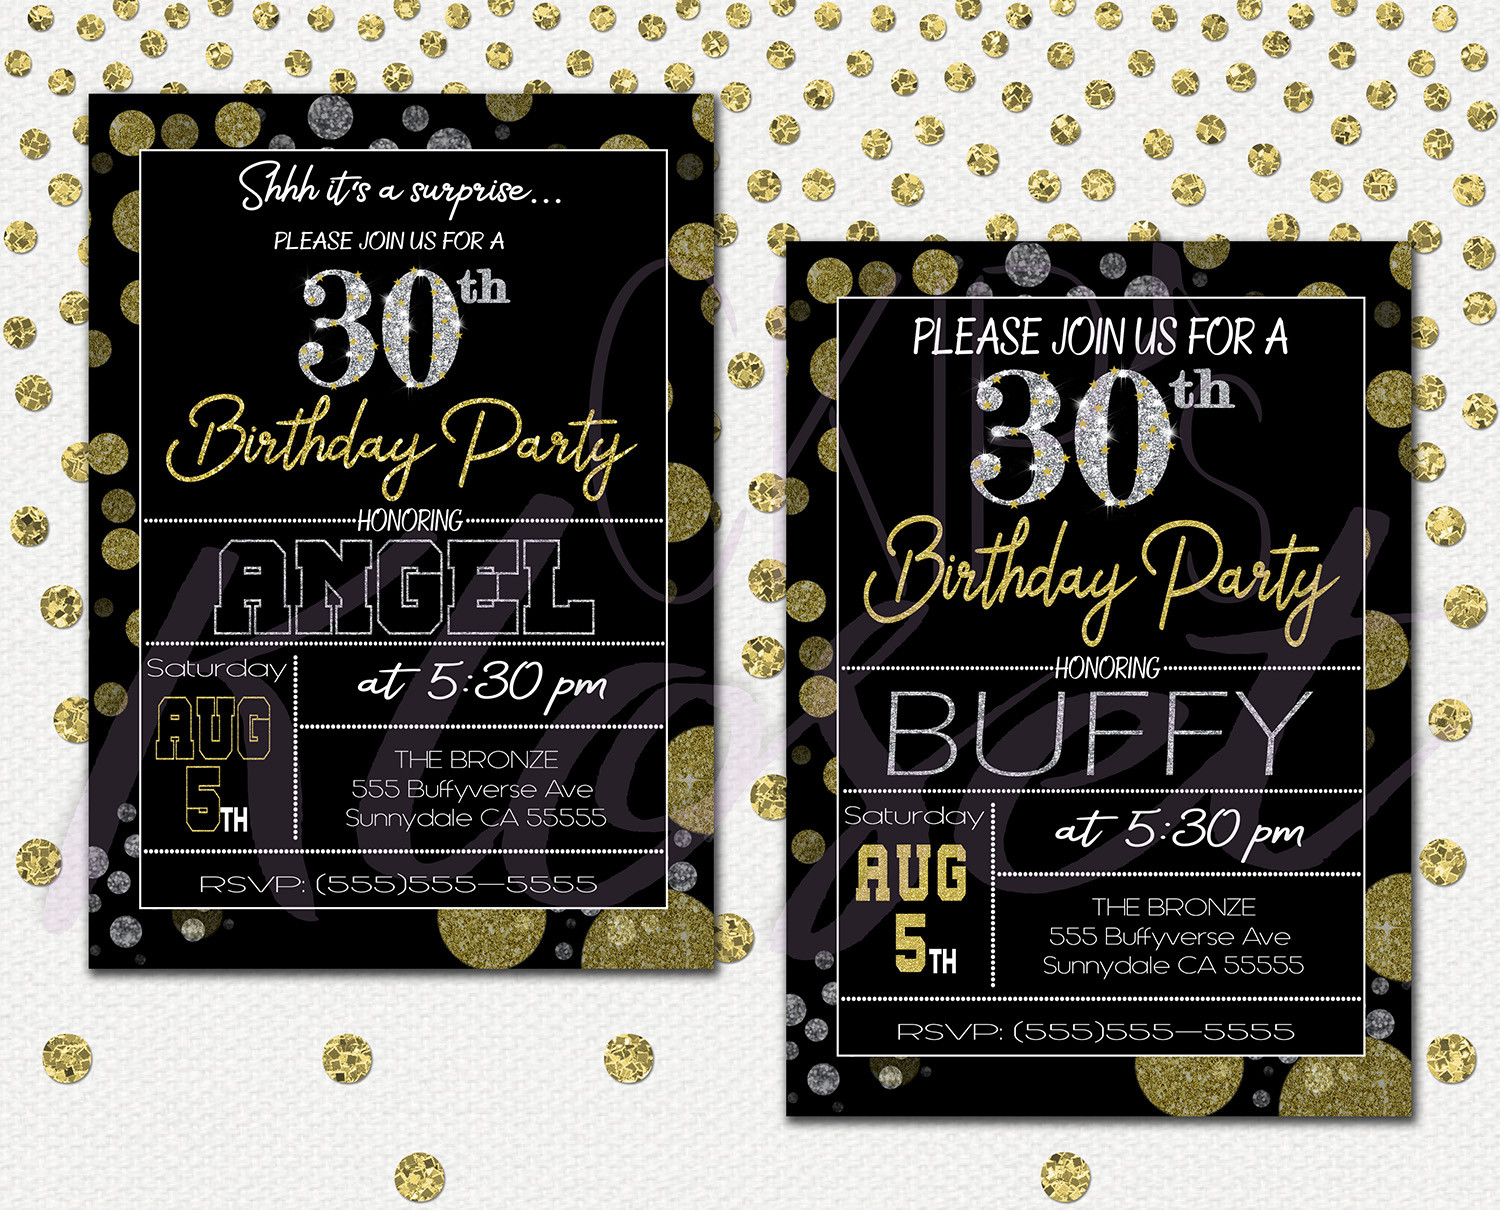 Surprise 30th Birthday Party Invitations
 Surprise 30th Birthday Invitations for Him or Her – Mens